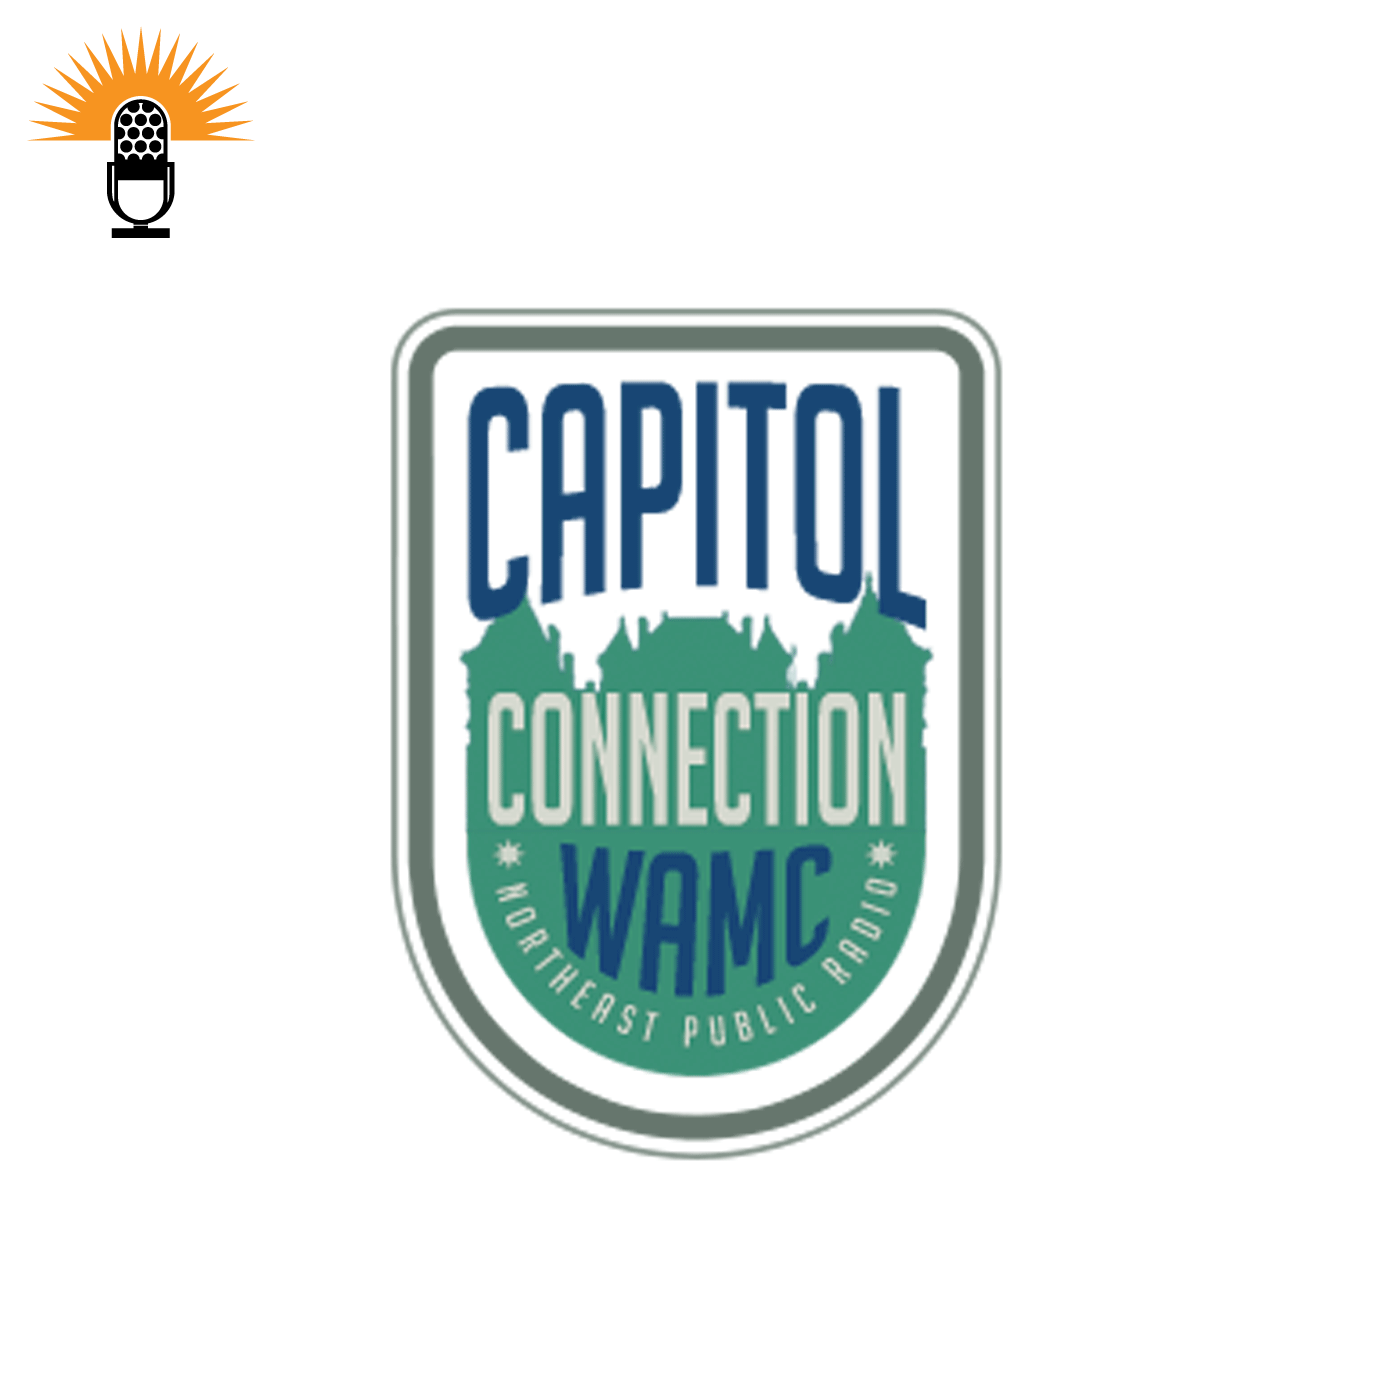 The Capitol Connection - John Kaehny, Executive Director of Reinvent Albany